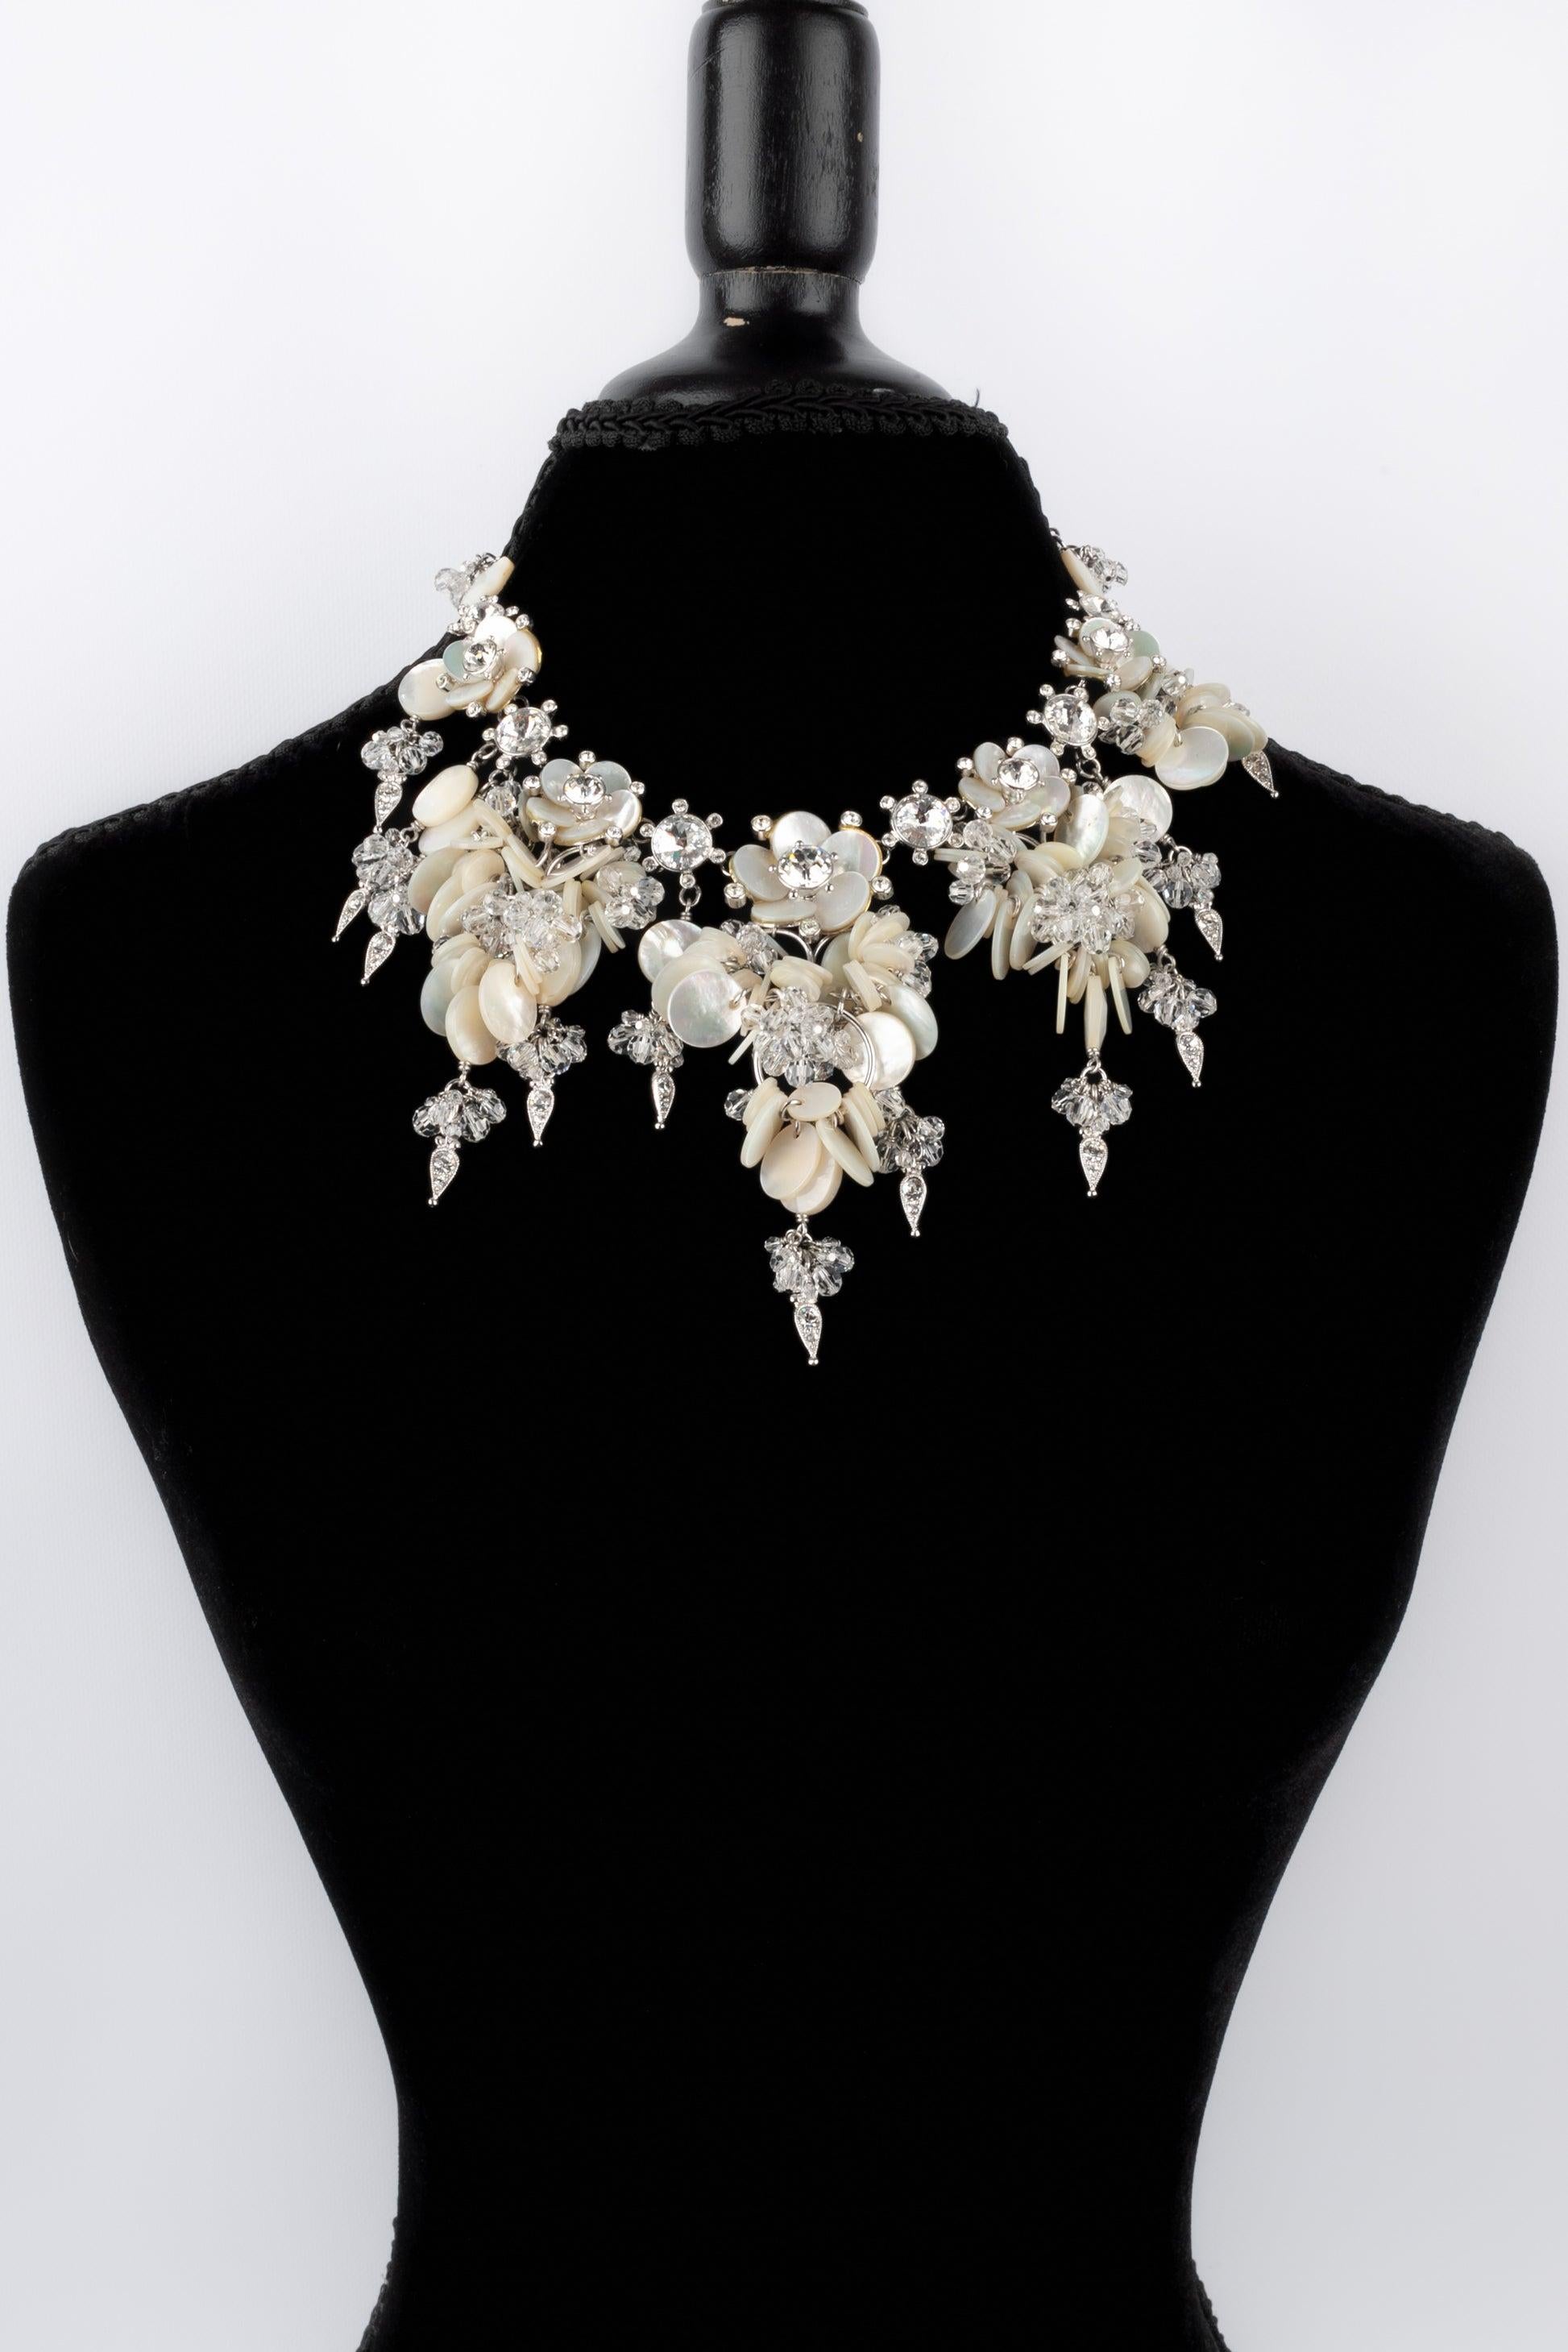 Dior - Silvery metal necklace ornamented with rhinestone and costume pearl pastilles.
Collection Automne-Hiver 2005 sous la direction de John Galliano.

Additional information:
Condition: Very good condition
Dimensions: Length: from 34 cm to 43